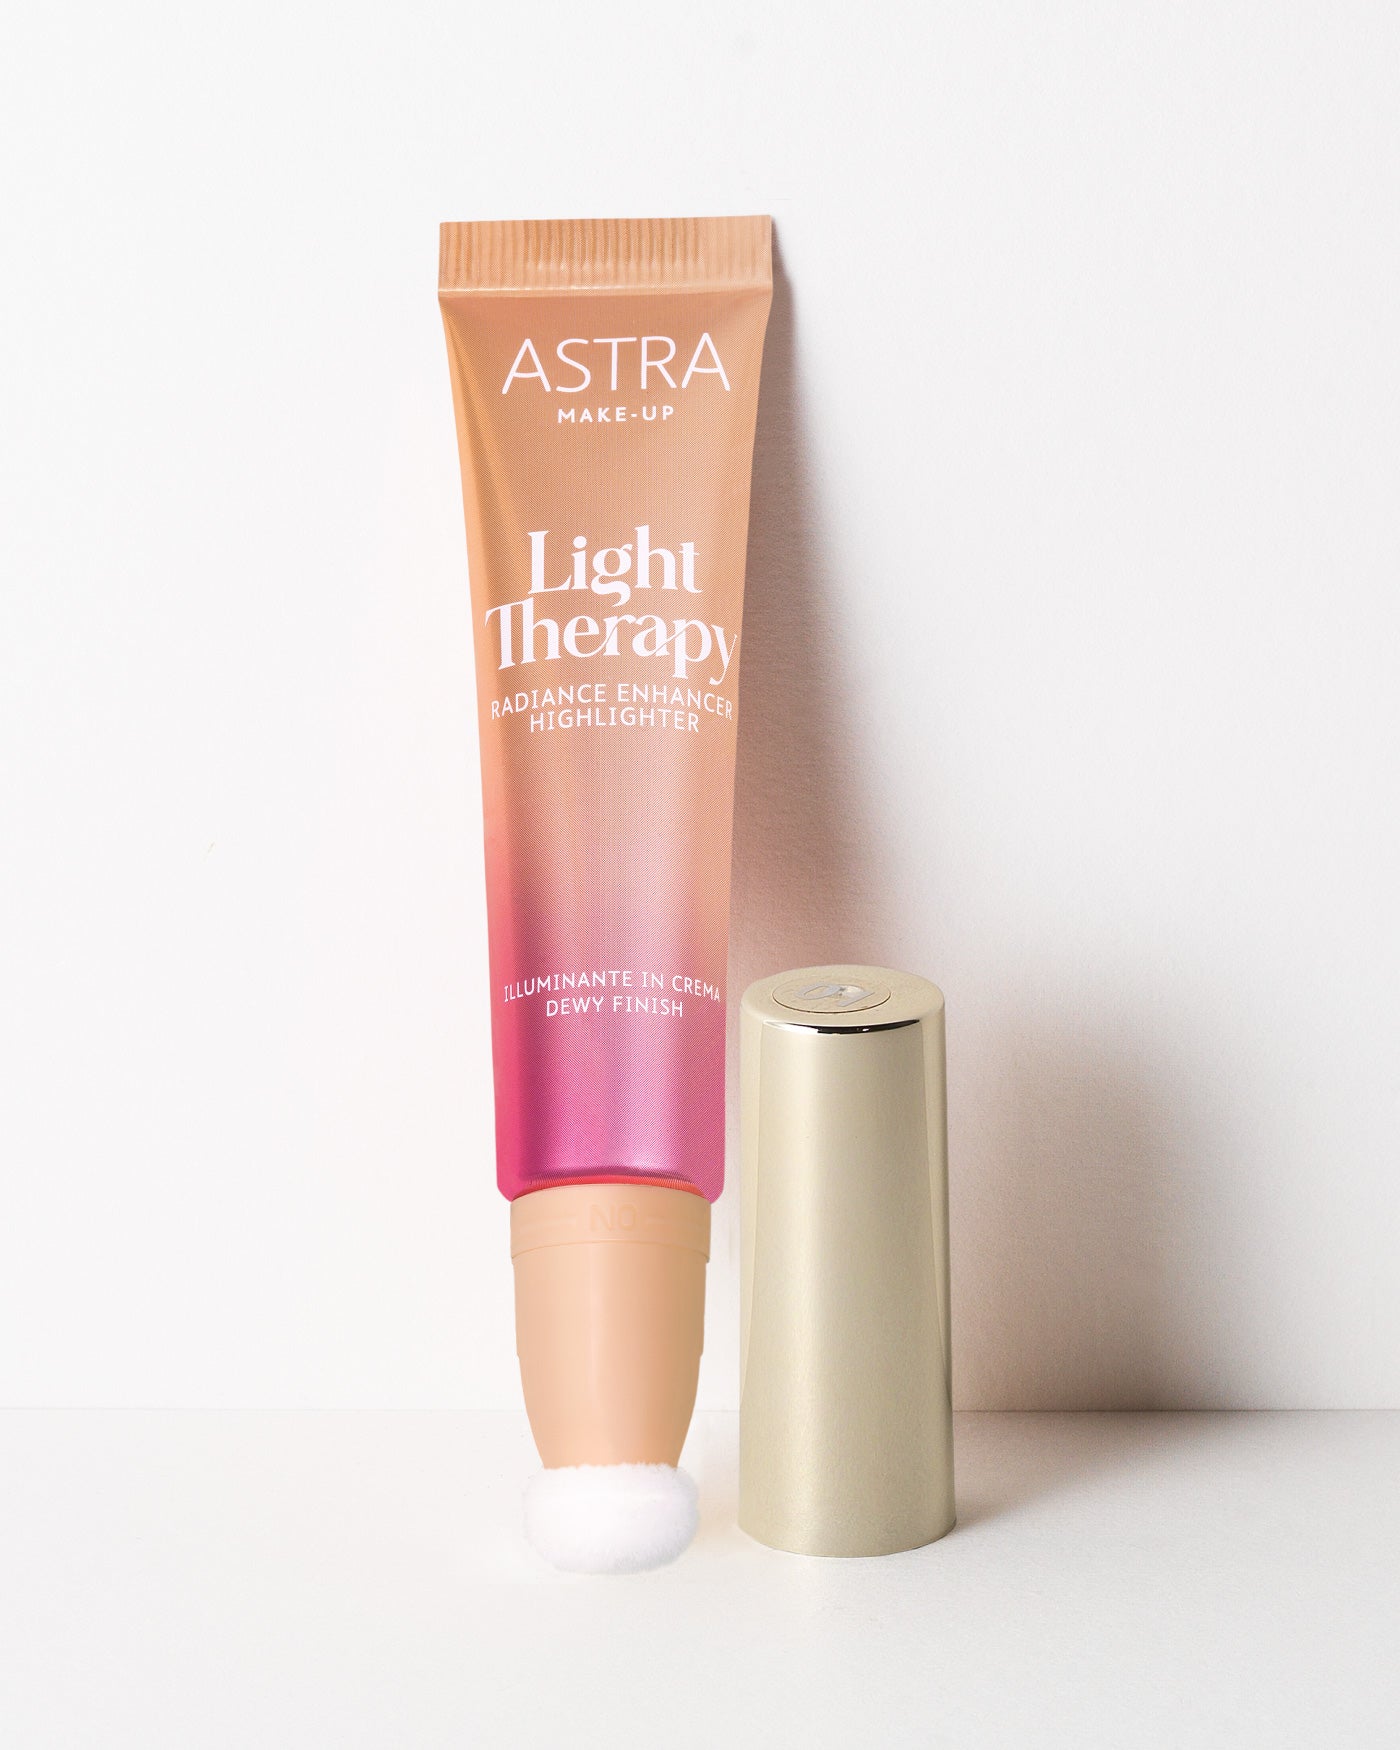 LIGHT THERAPY - All Products - Astra Make-Up